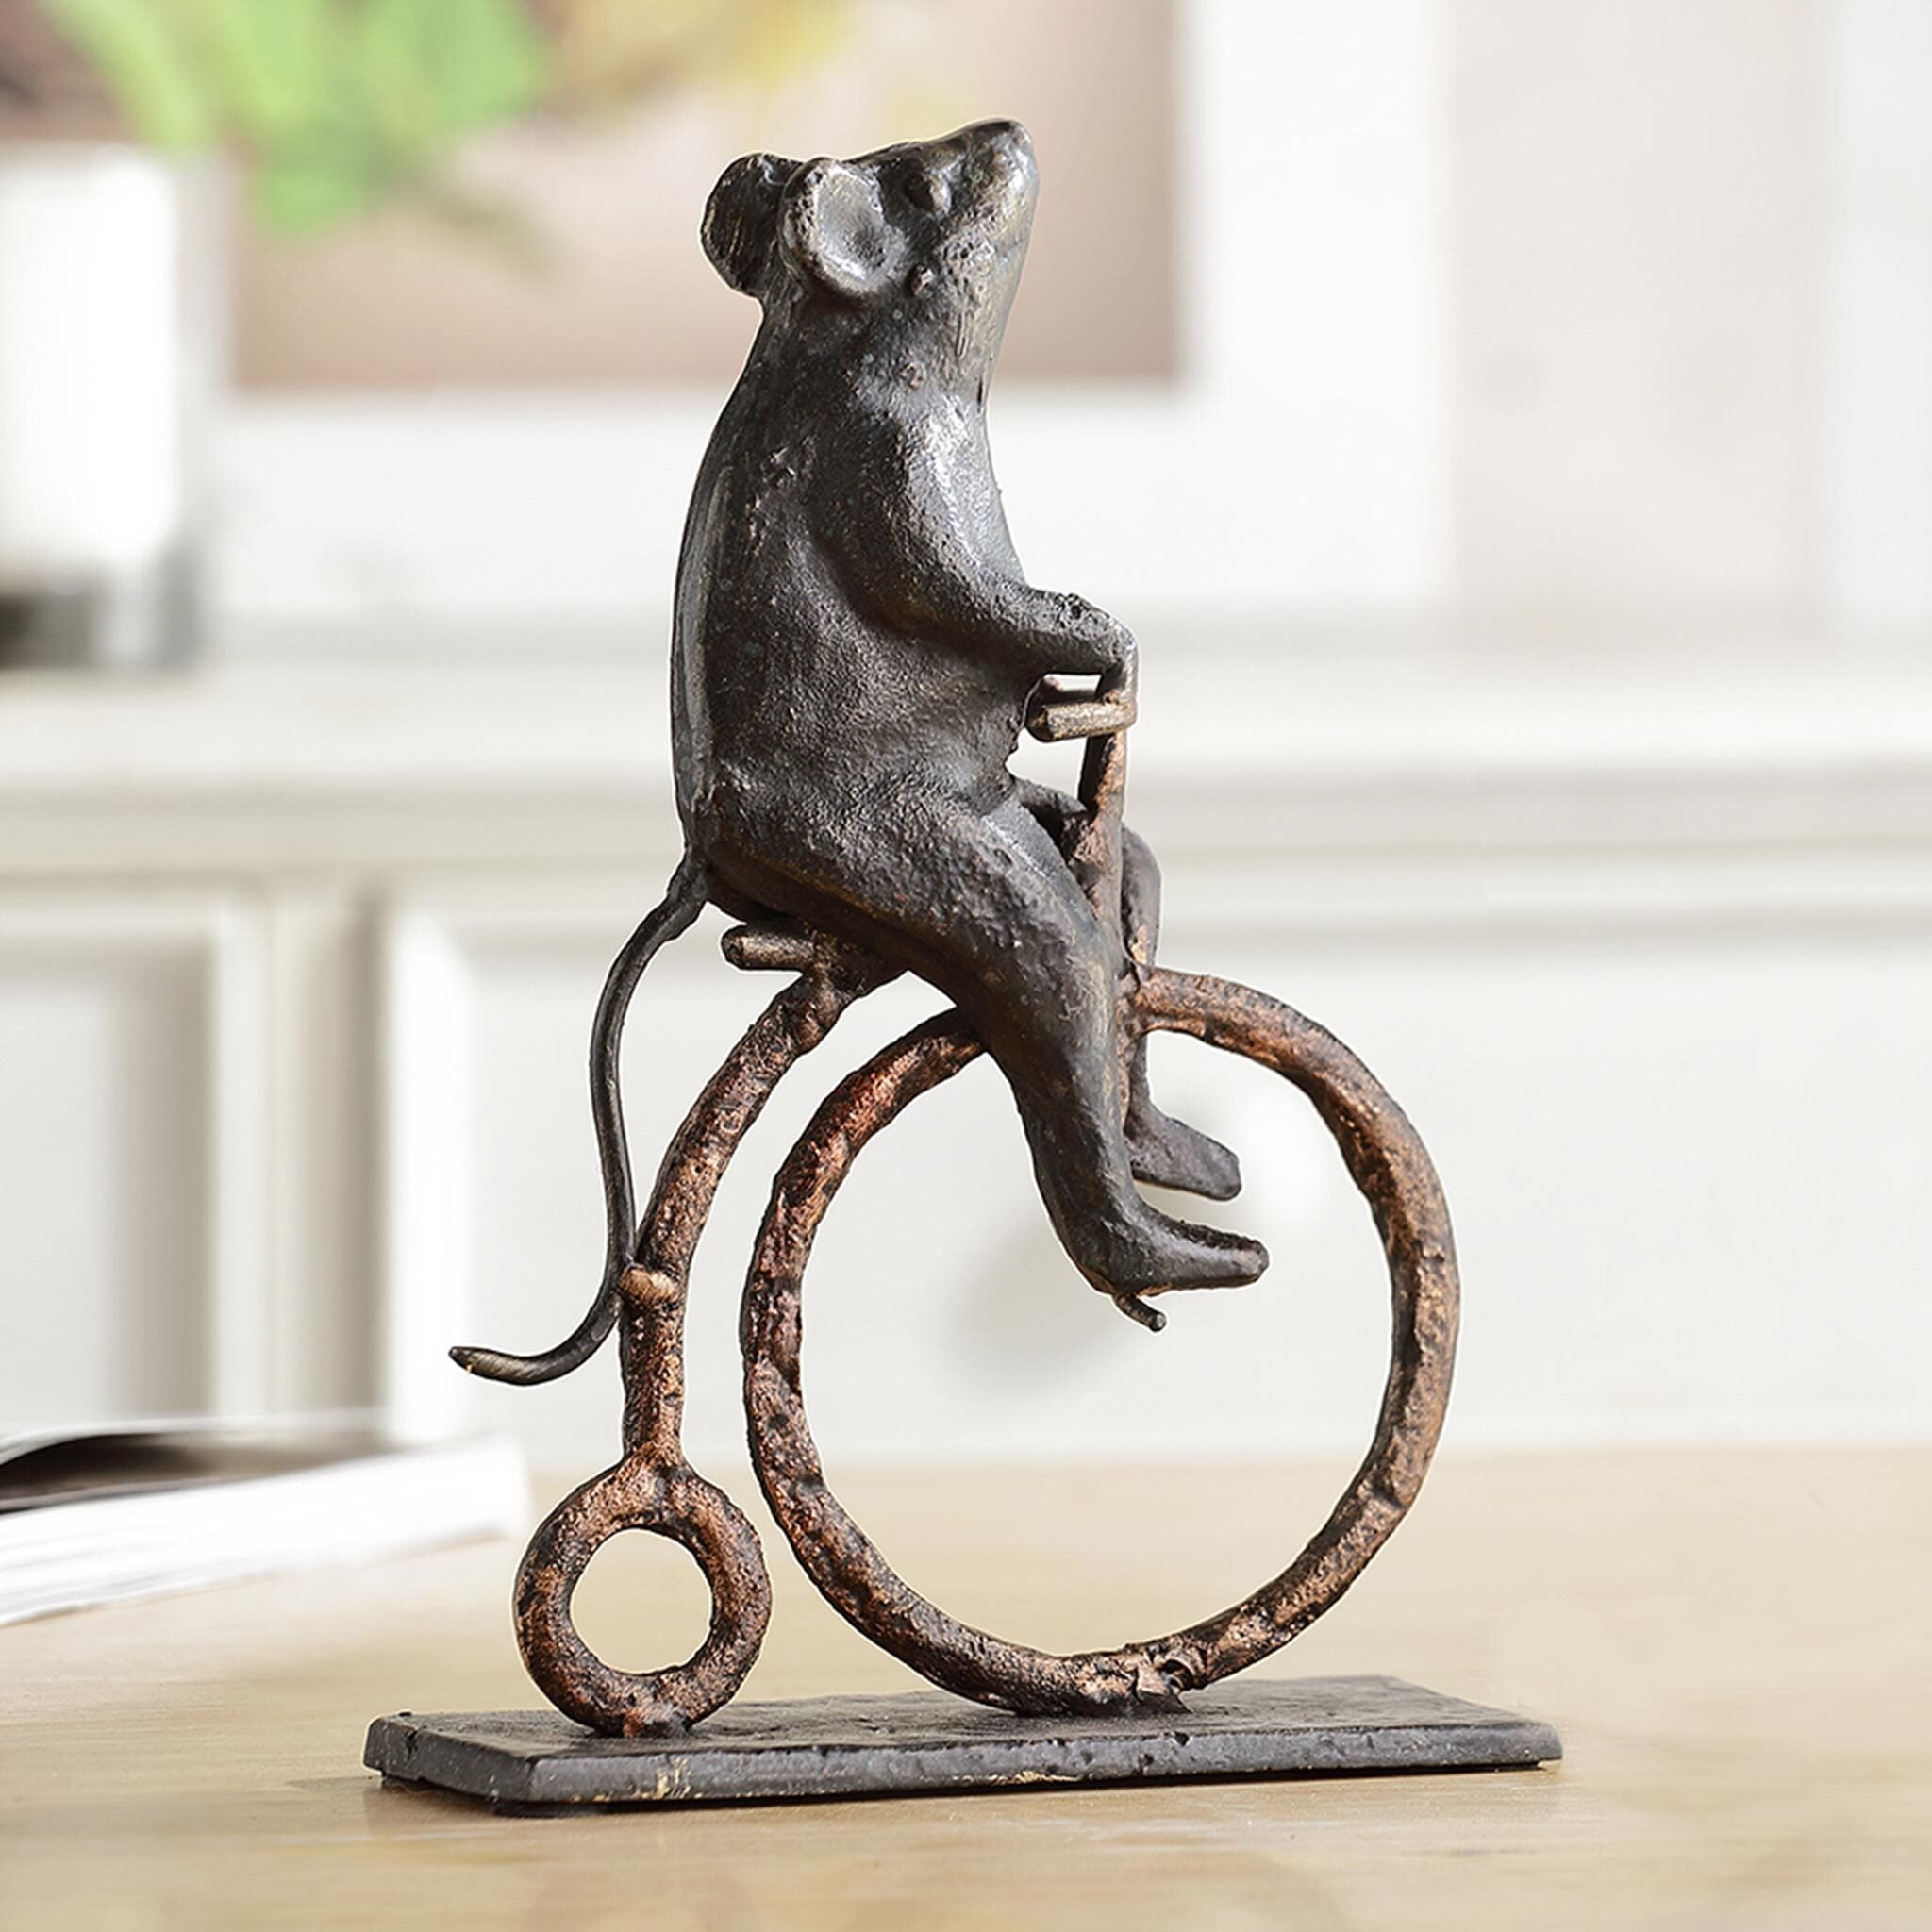 Mouse on Antique Bicycle Statue